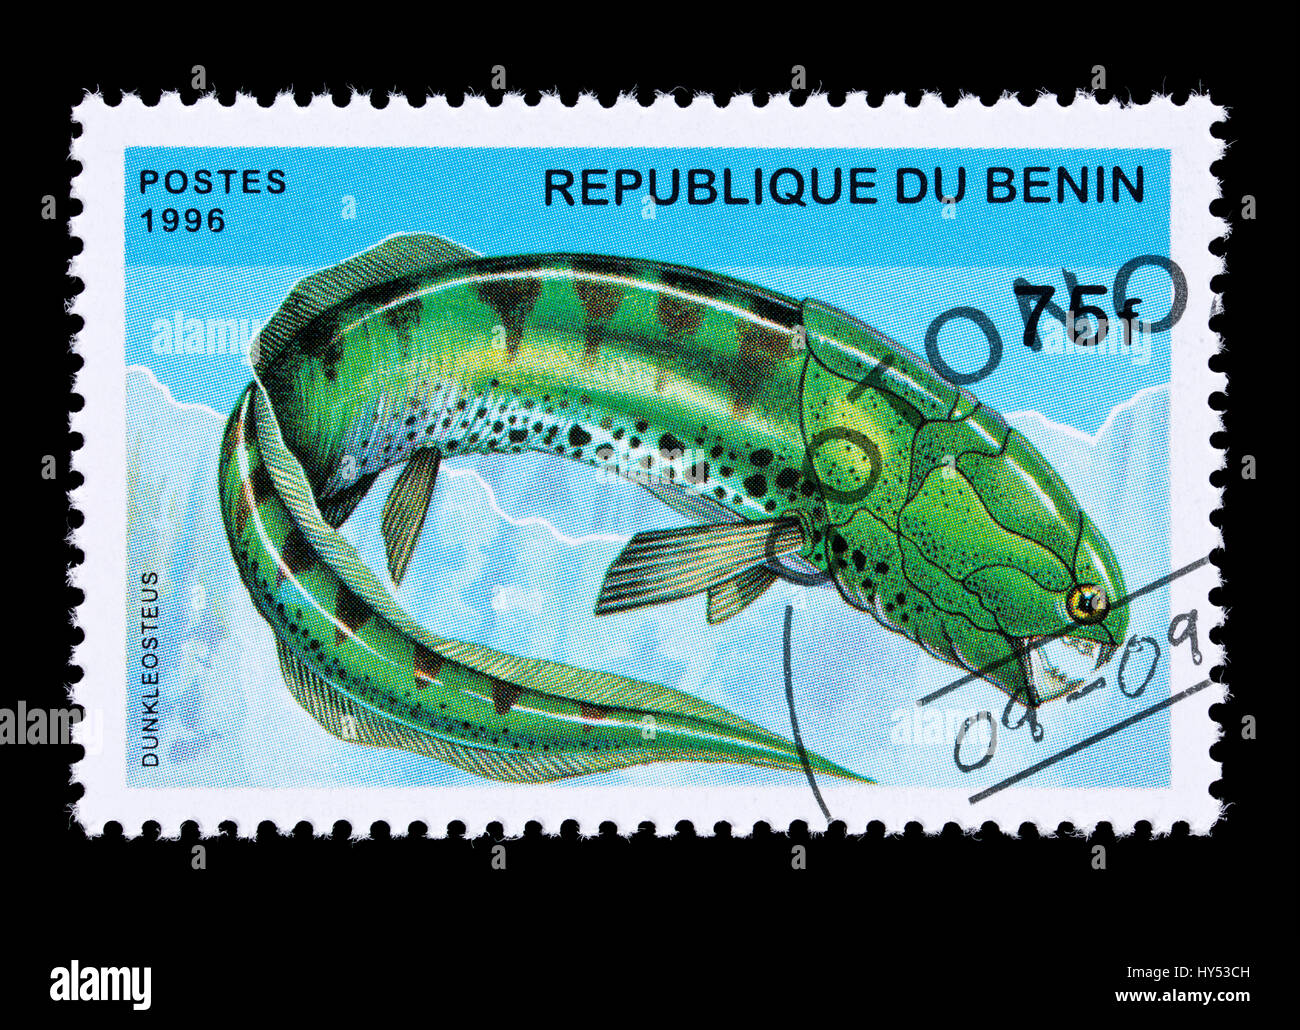 Postage stamp from Benin depicting a dunkleosteus (ancient fish) Stock Photo